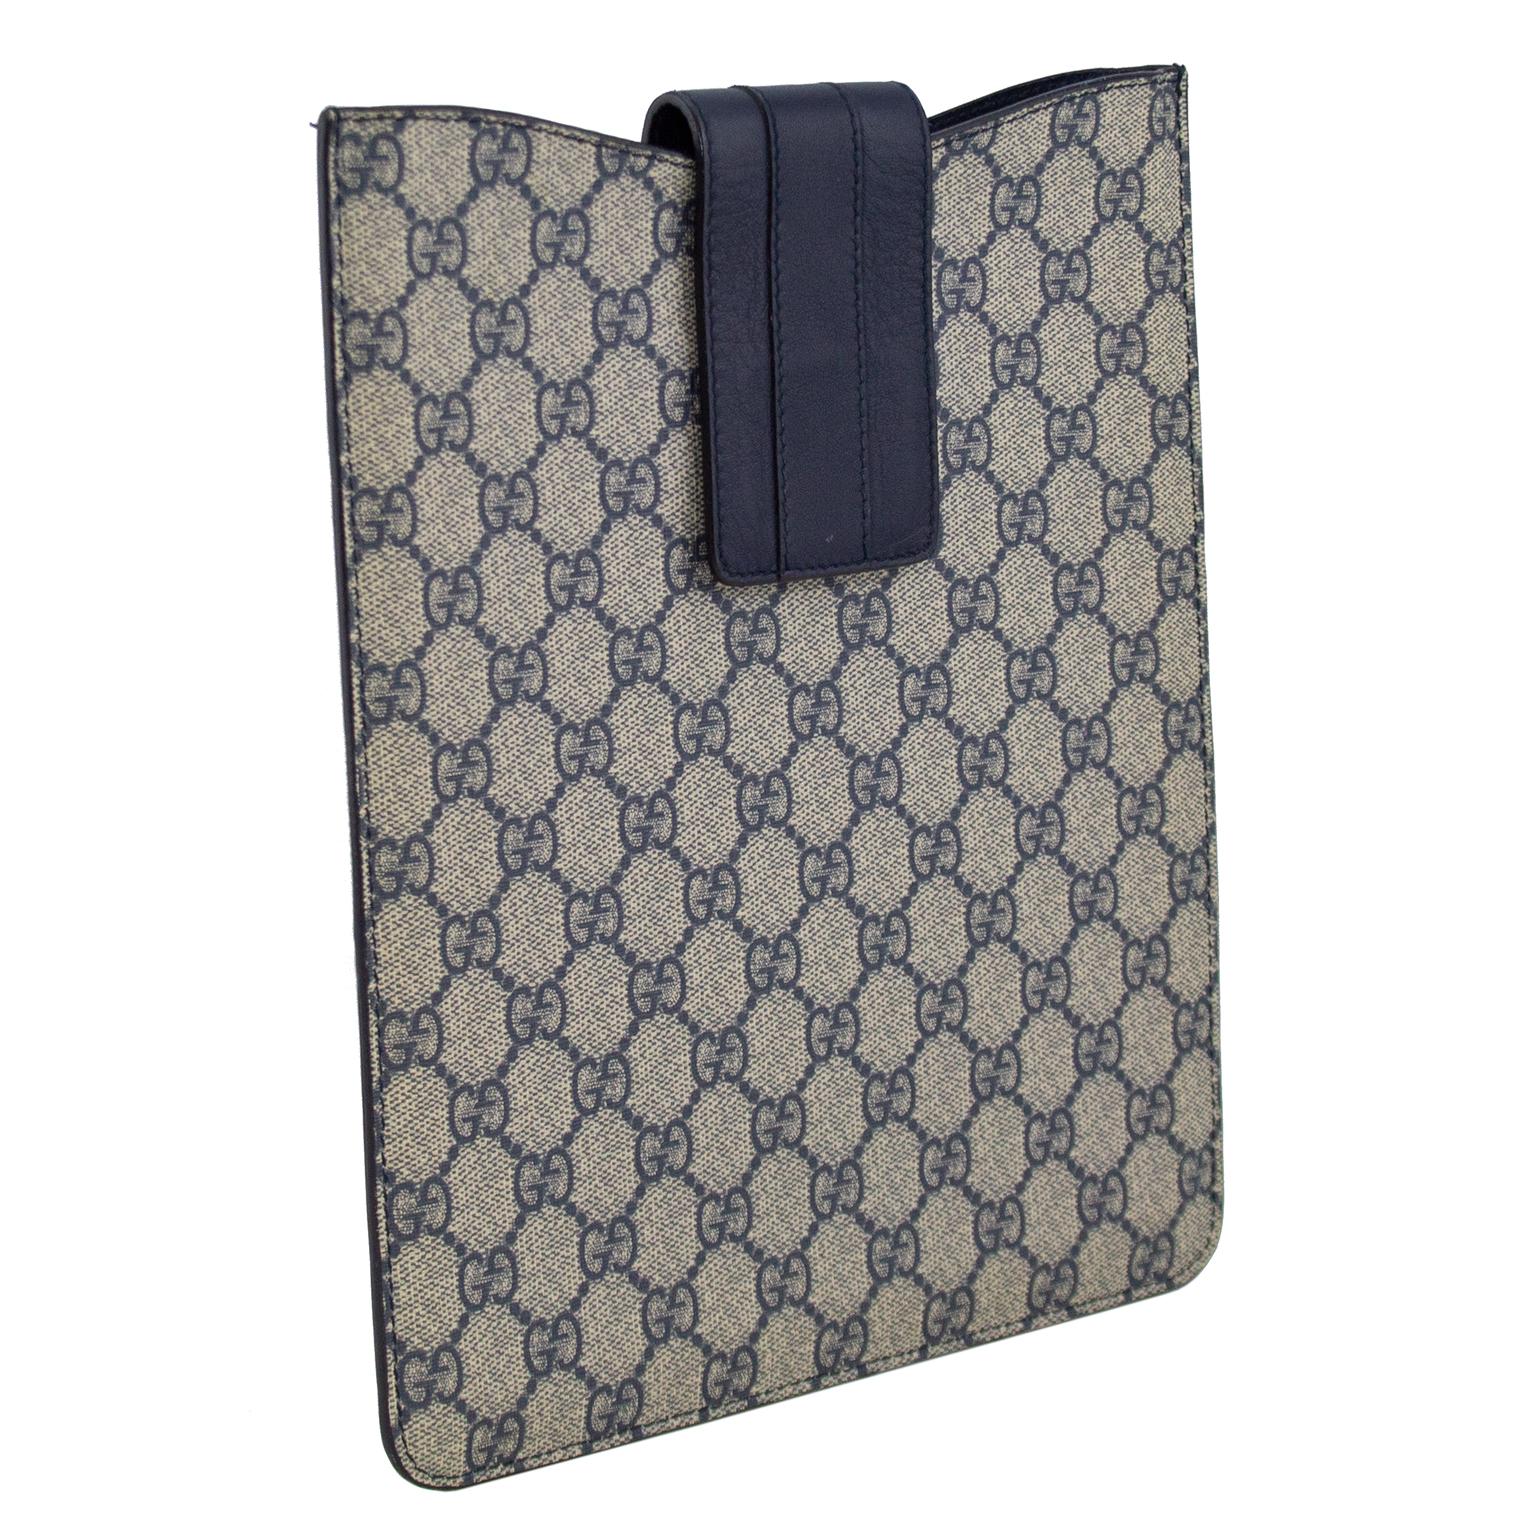 2000's Gucci iPad case/sleeve. Navy and grey all over Gucci logo leather with navy blue leather Velcro top closure. Soft black suede interior. Easy and chic way to protect your iPad. Great for travel. Excellent vintage condition. Made in Italy.